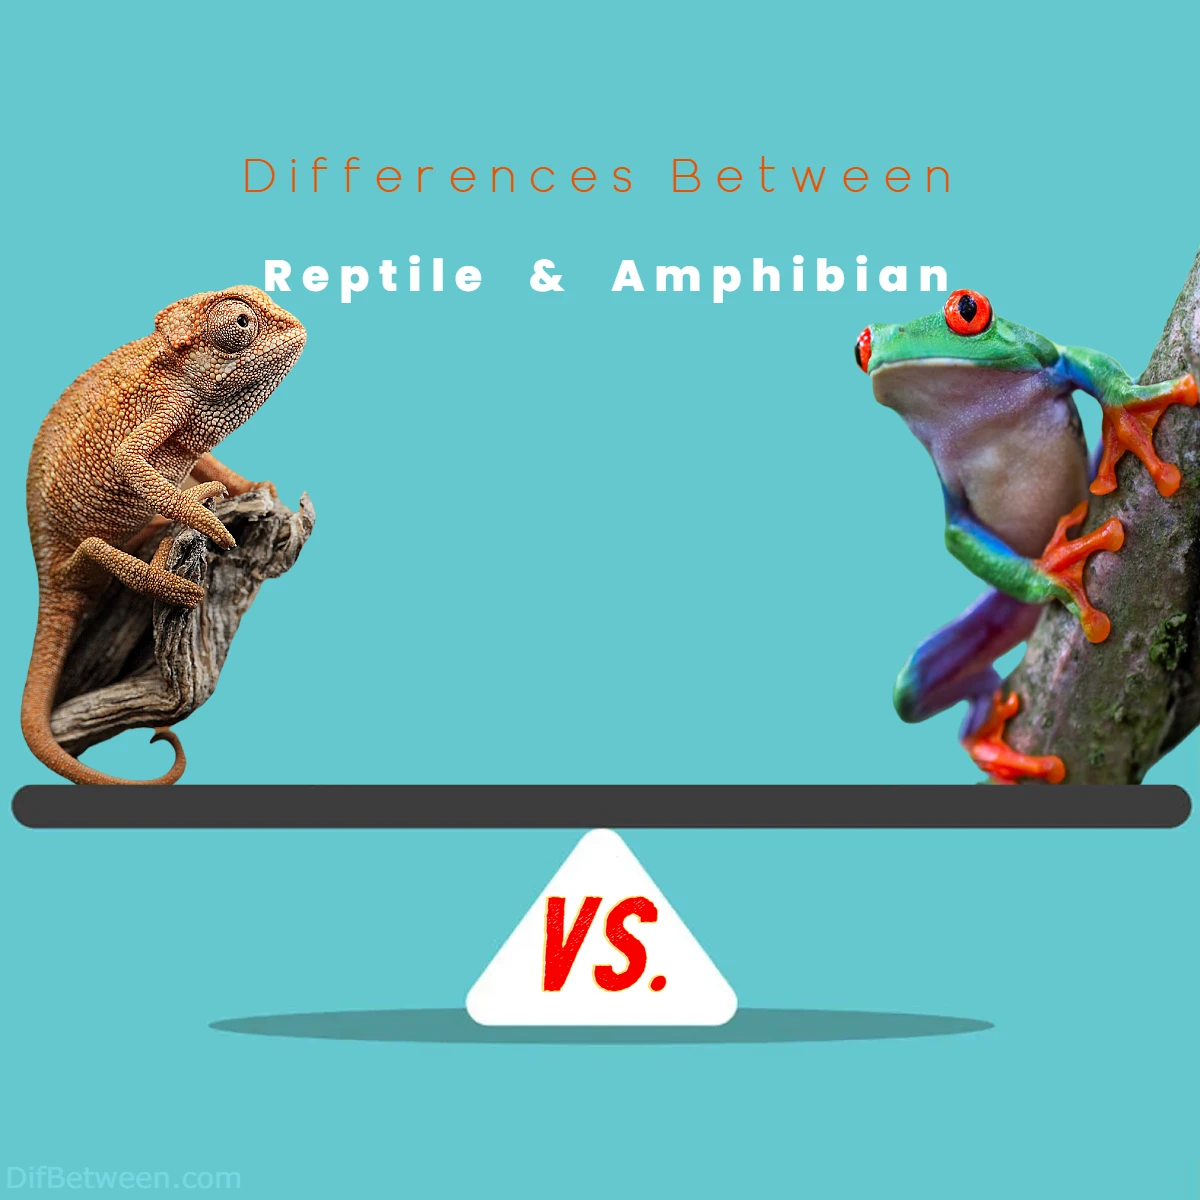 Differences Between Reptile vs Amphibian